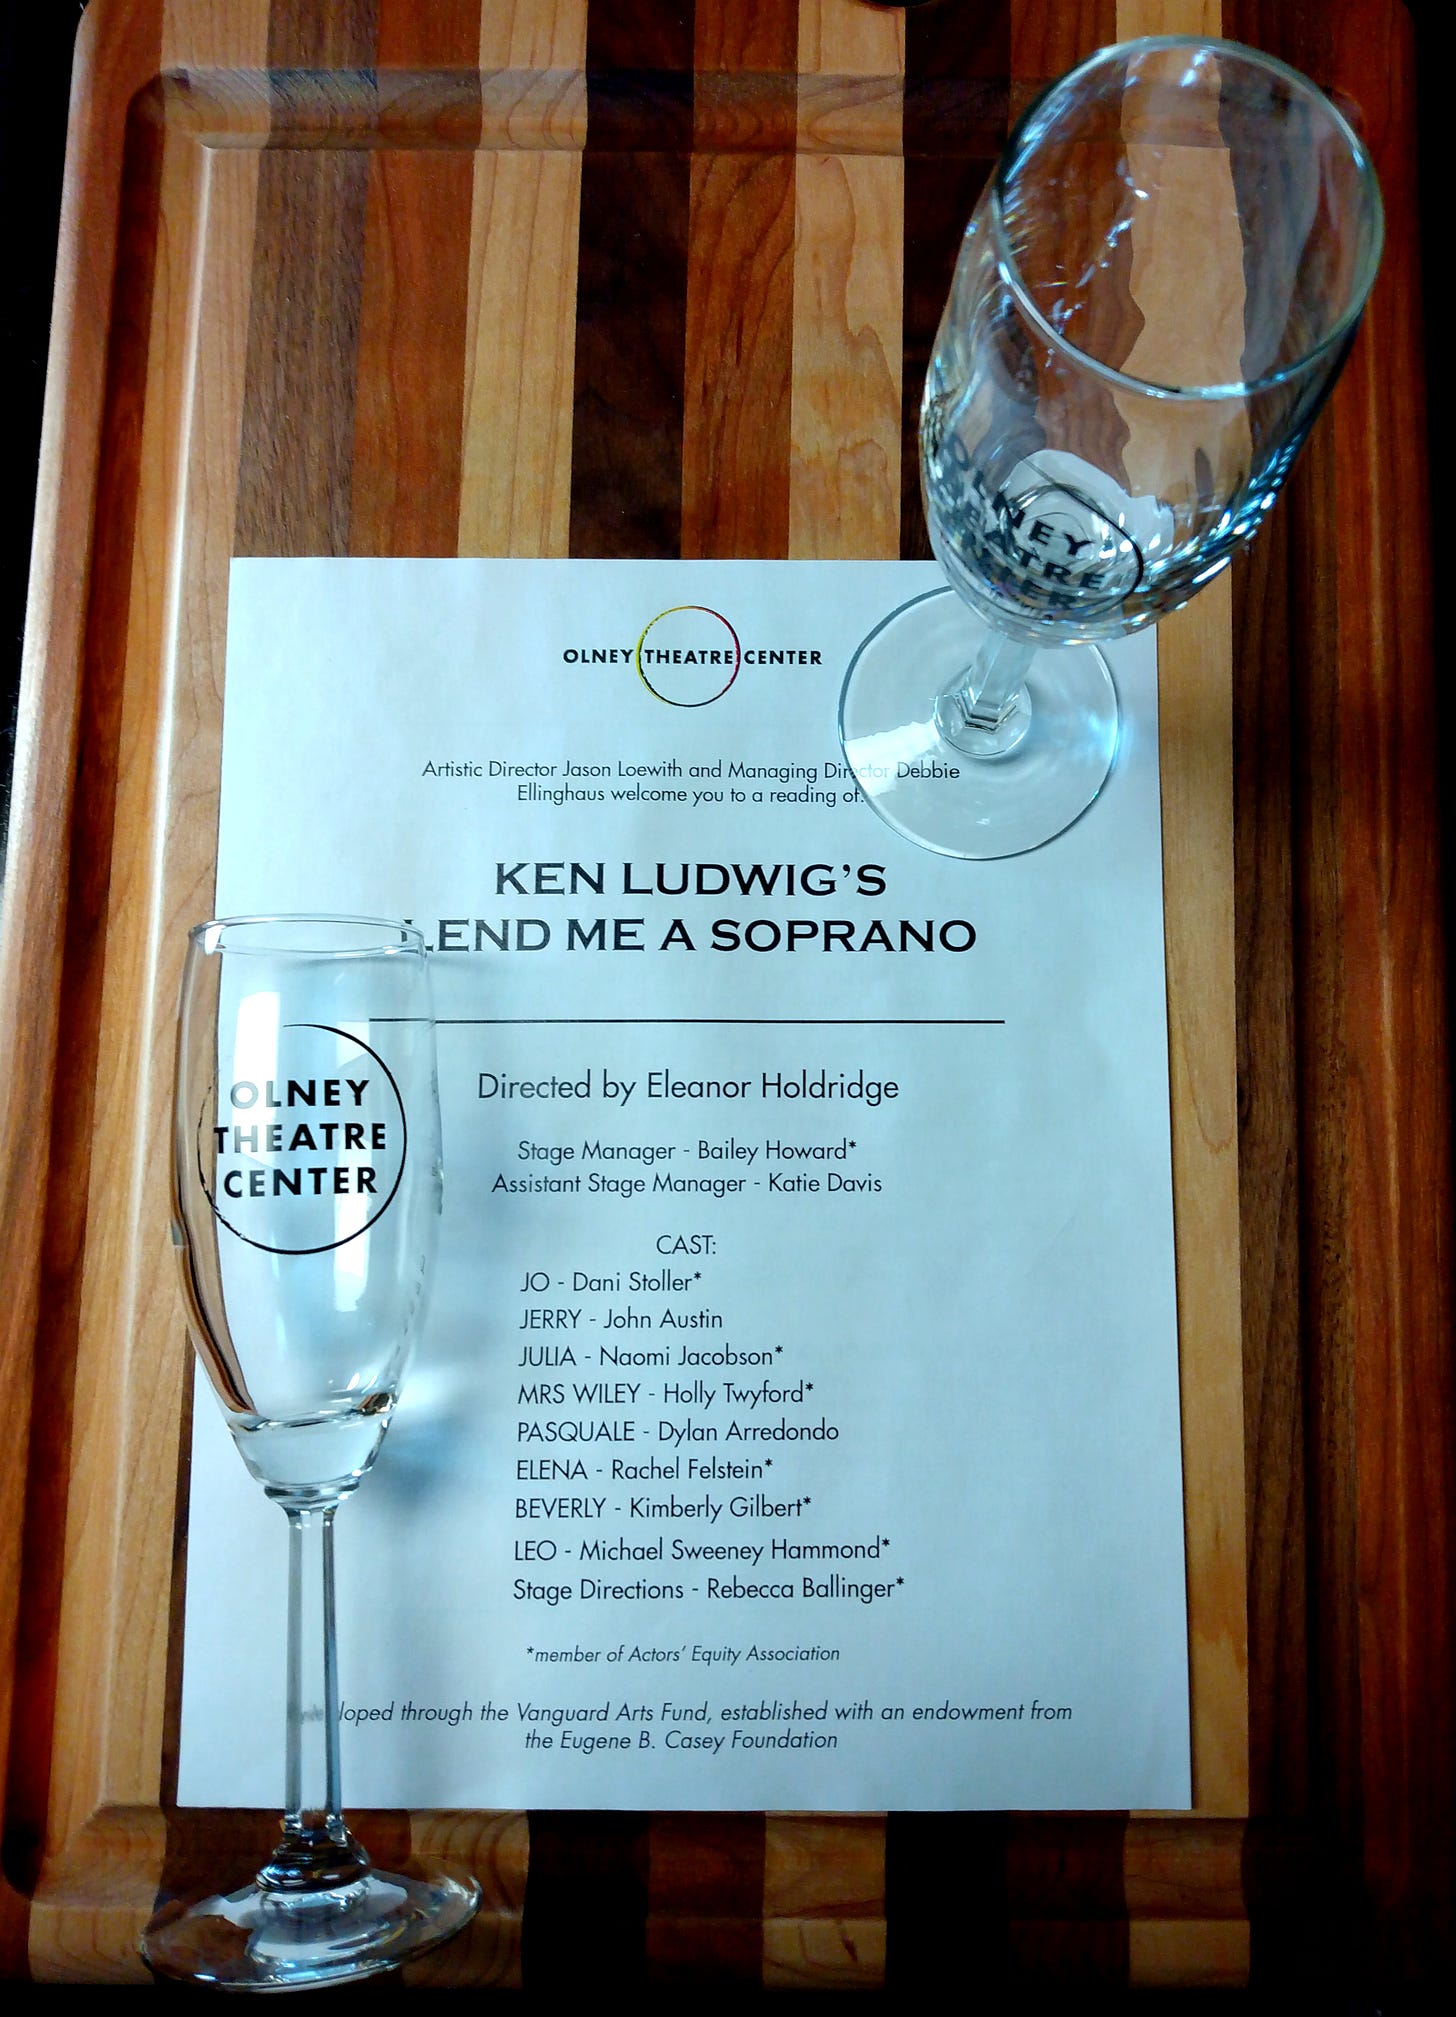 The program for the reading of Ken Ludwig's Lend M A Soprano.